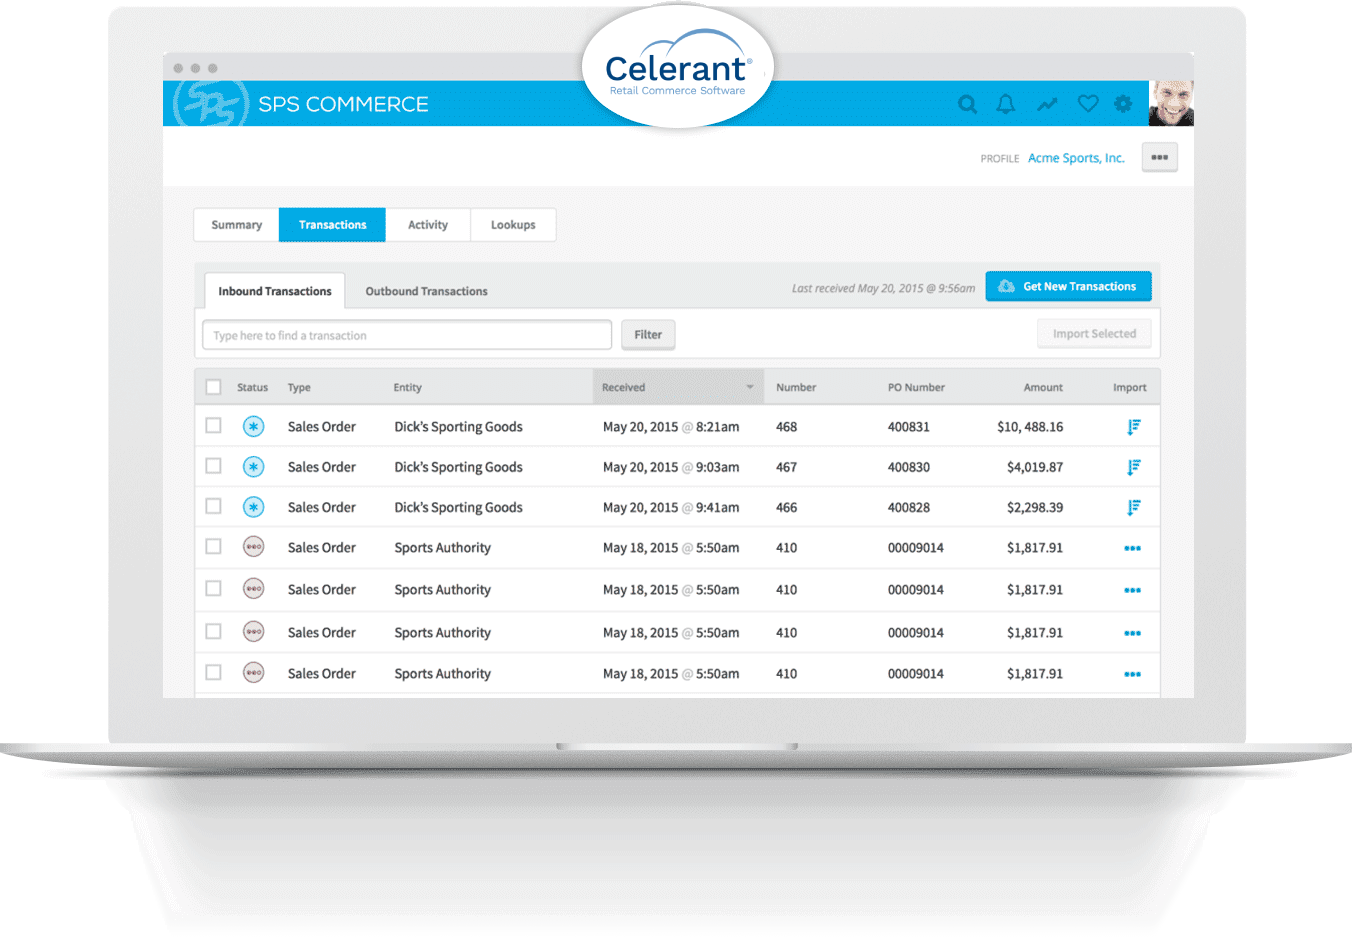 SPS Fulfillment makes it easy to review, process and send order information within one simple platform.